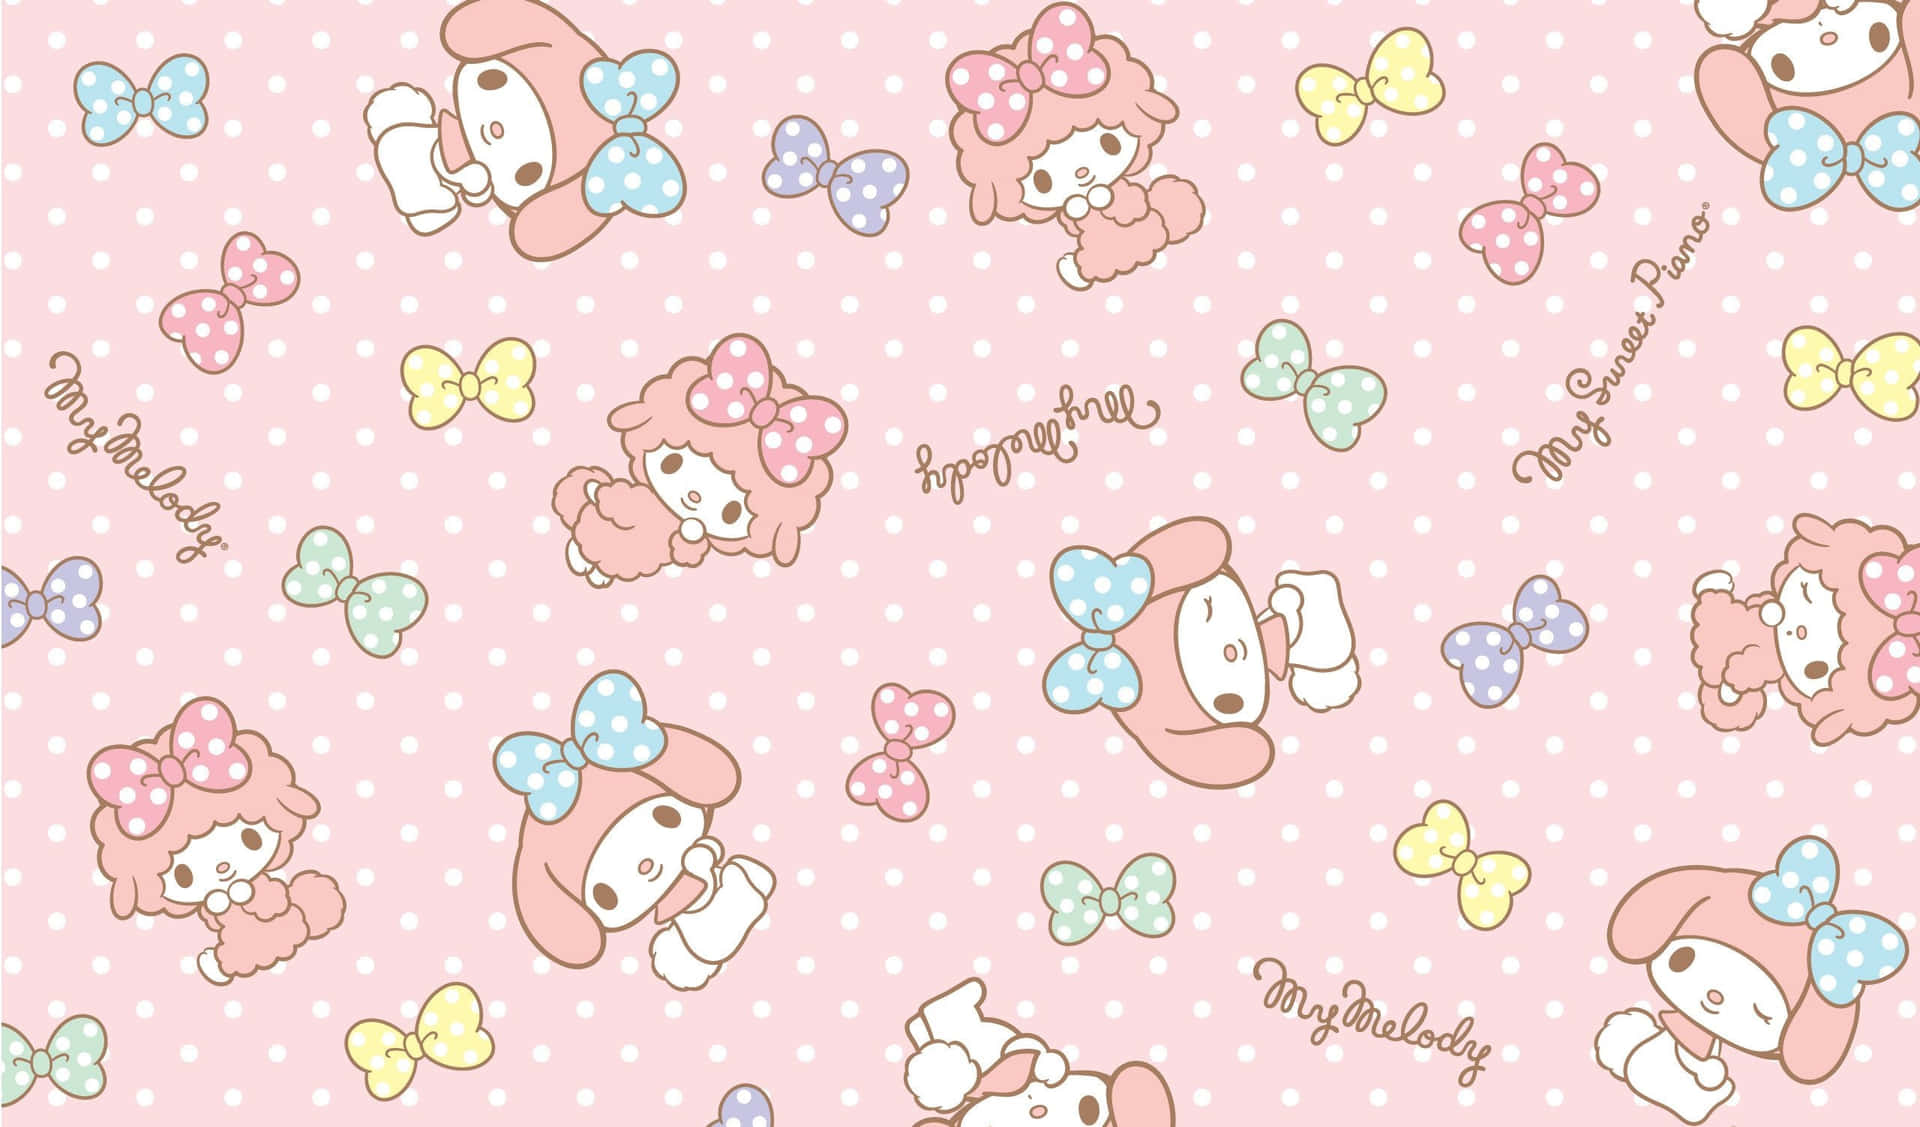 Celebrate your desk space with My Melody Desktop Wallpaper